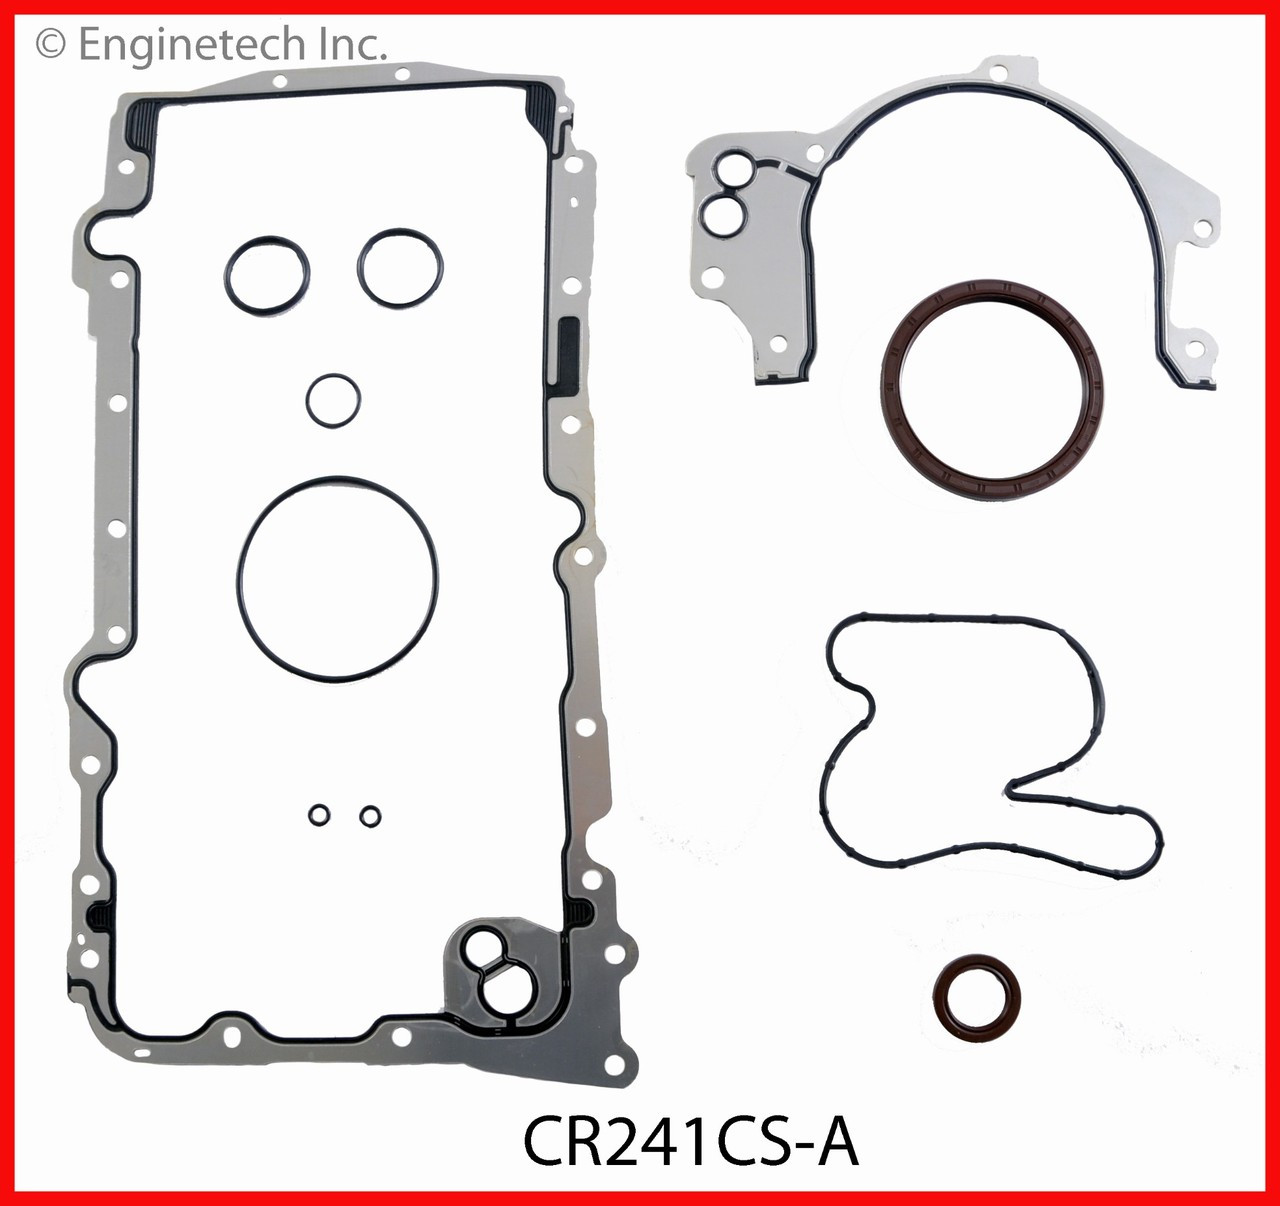 2009 Chrysler Town & Country 4.0L Engine Lower Gasket Set CR241CS-A -12